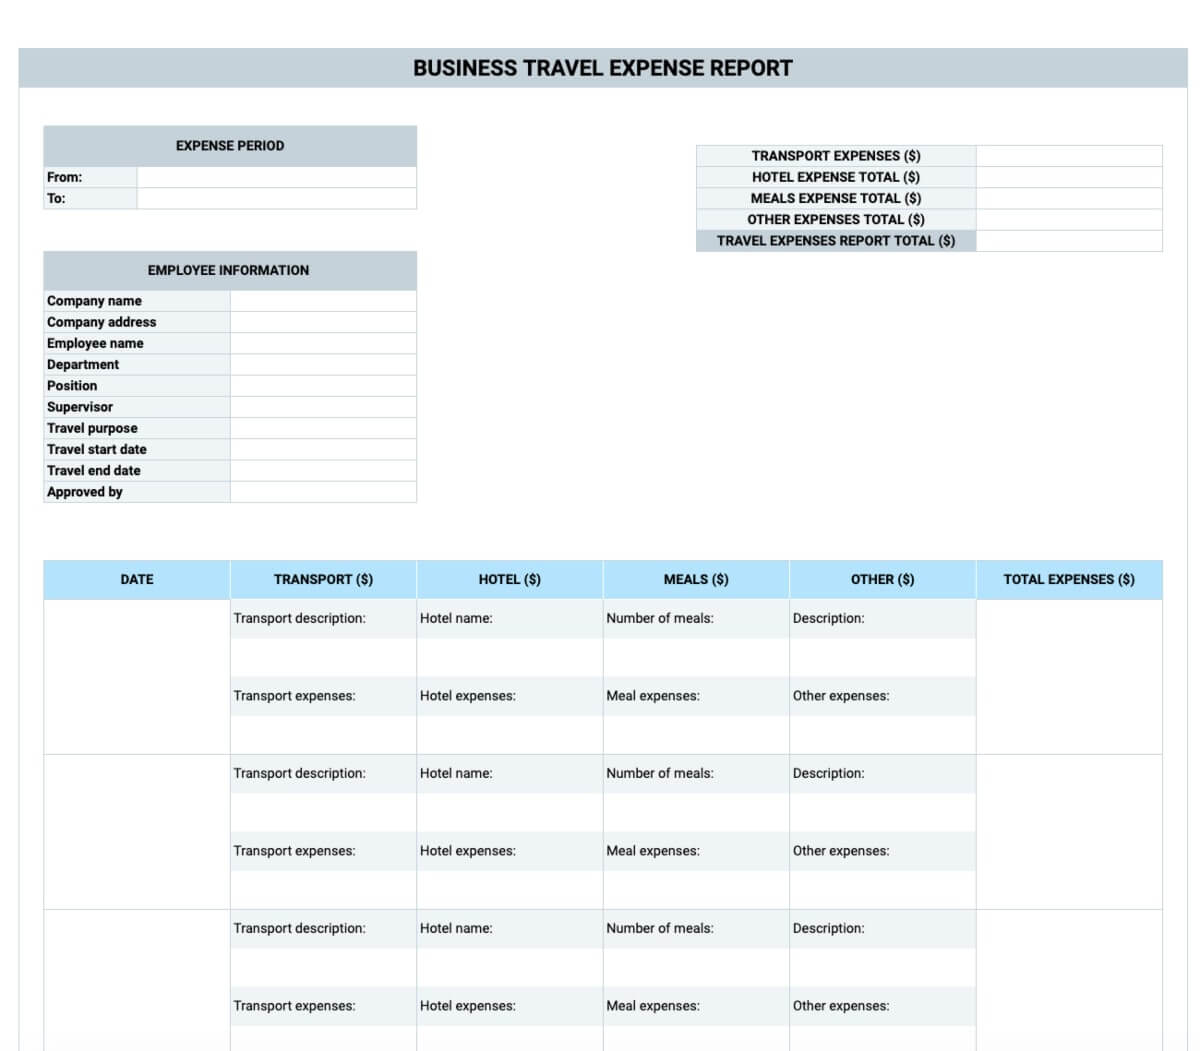 Preview of the Business Travel Expense Report Template